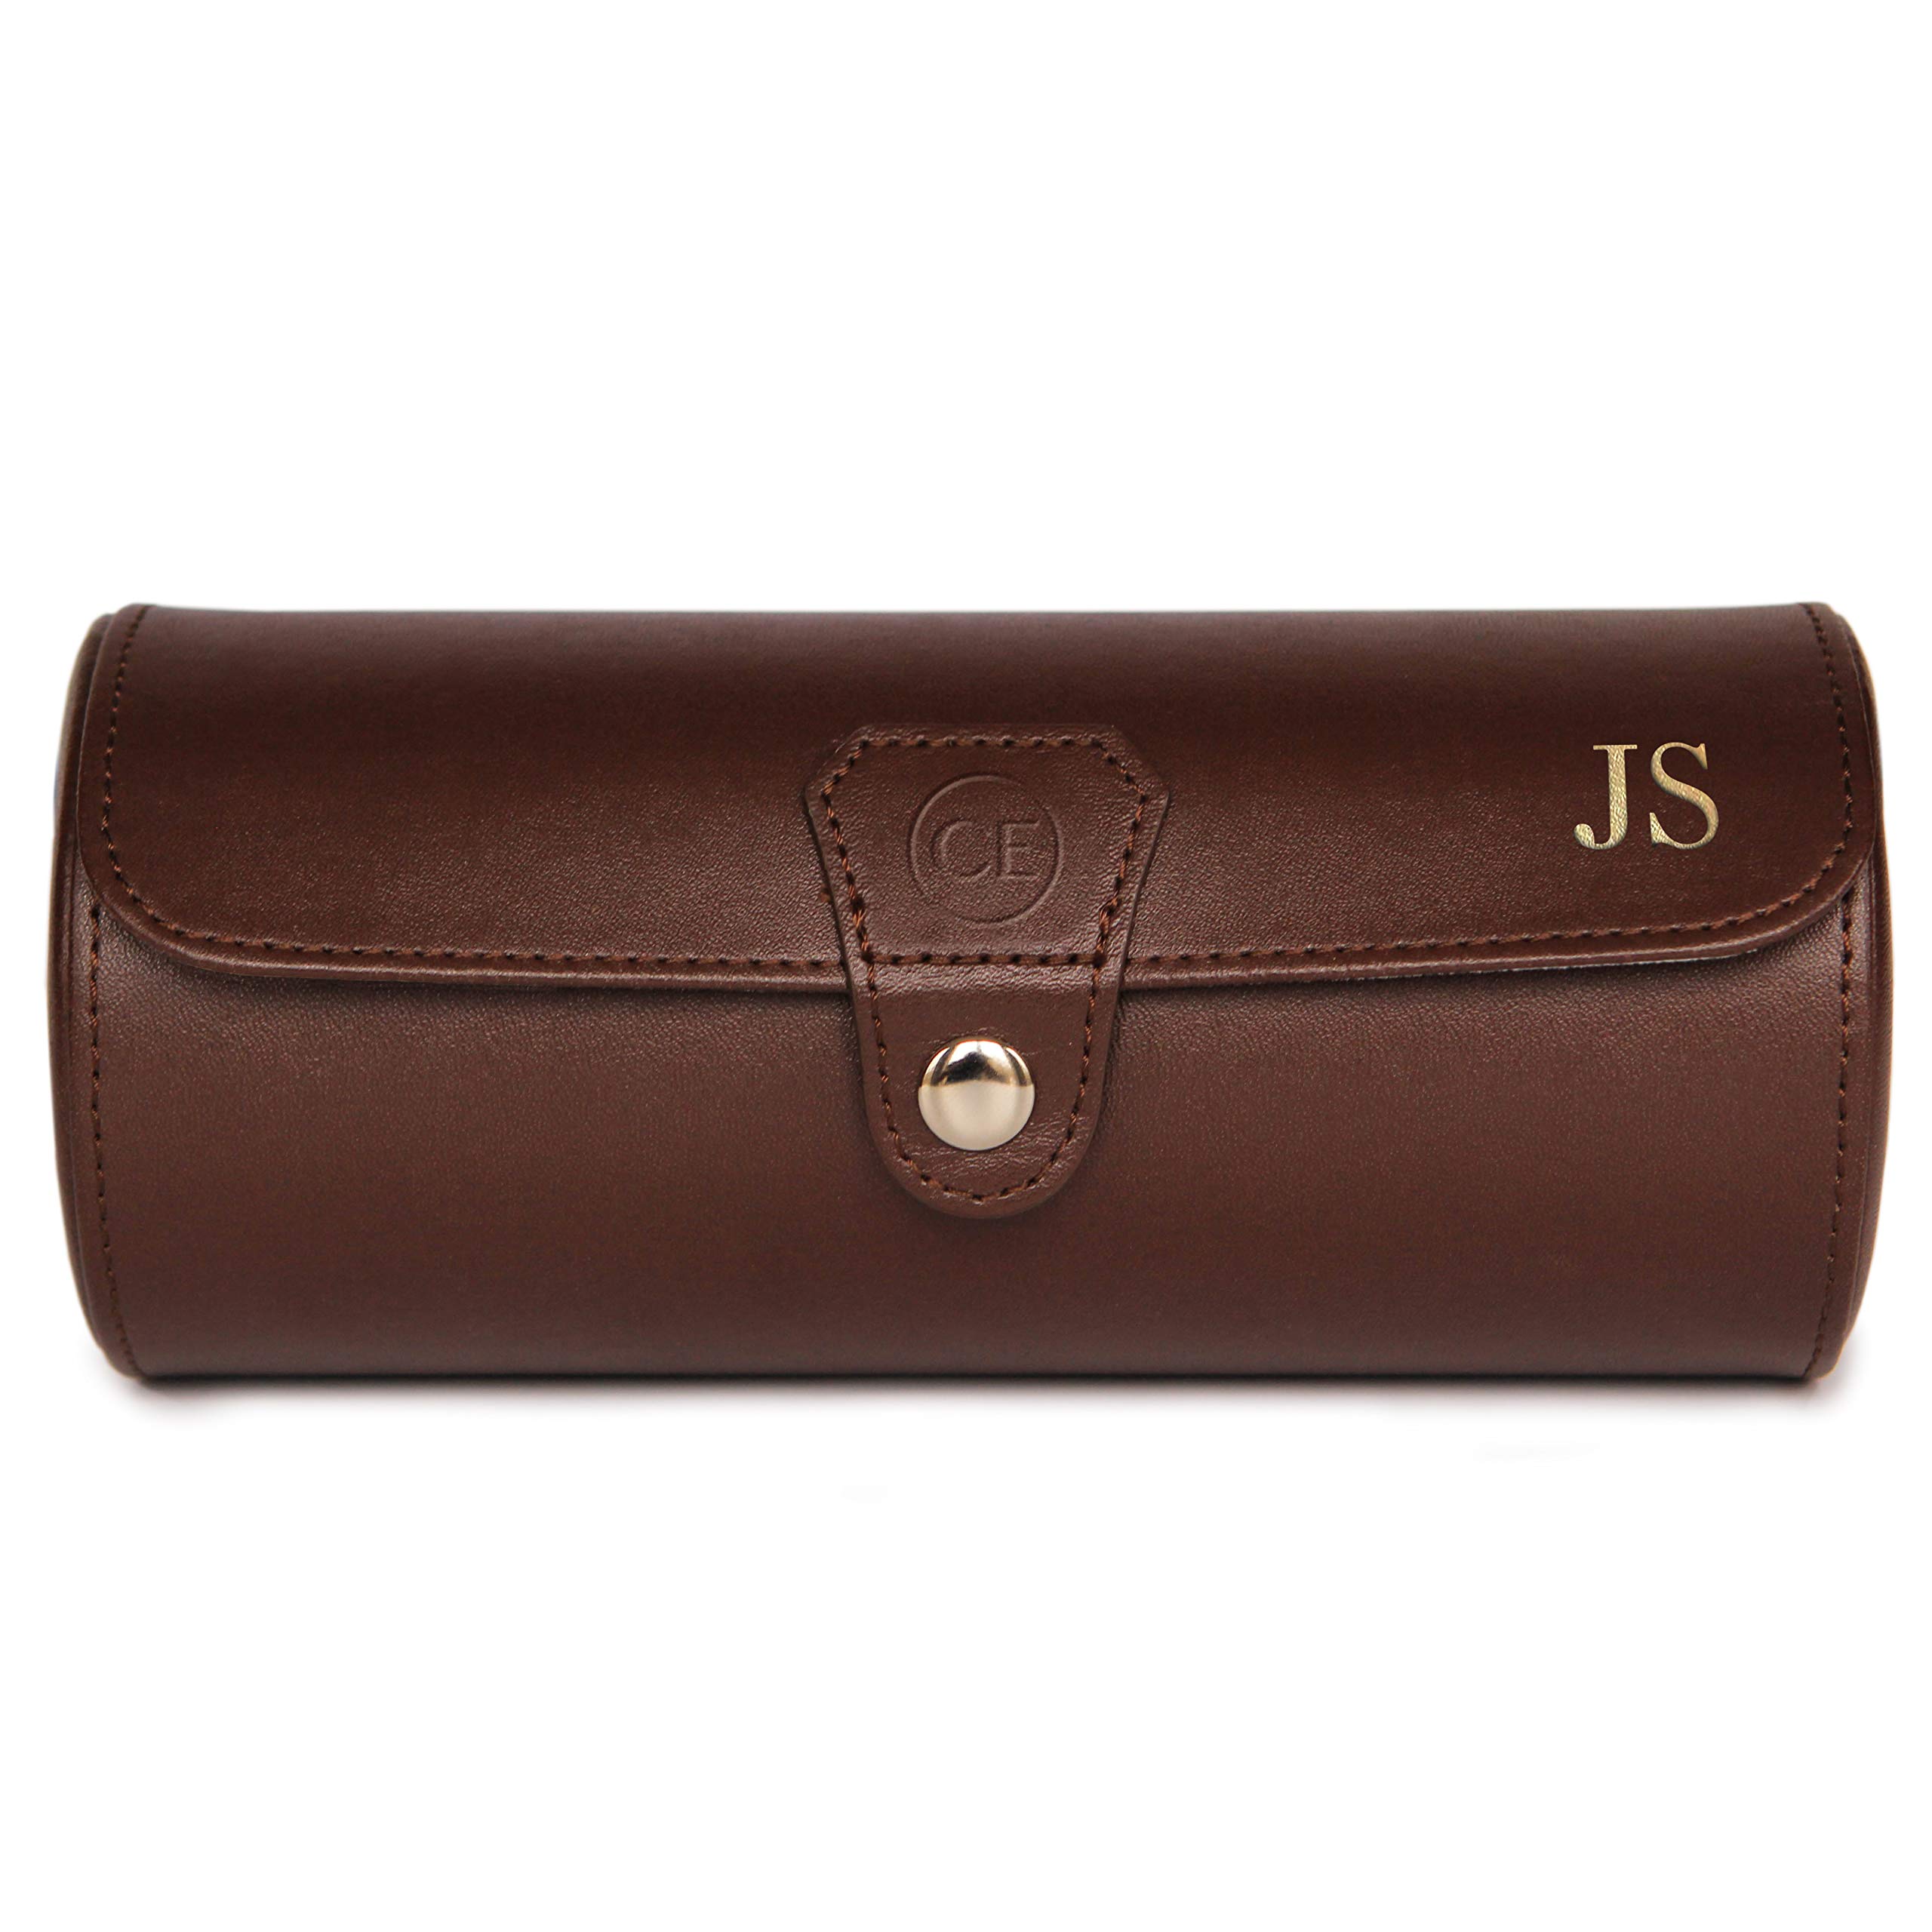 CASE ELEGANCE Monogrammed Limited Edition Chocolate Color - Vegan Leather Watch Roll Organizer